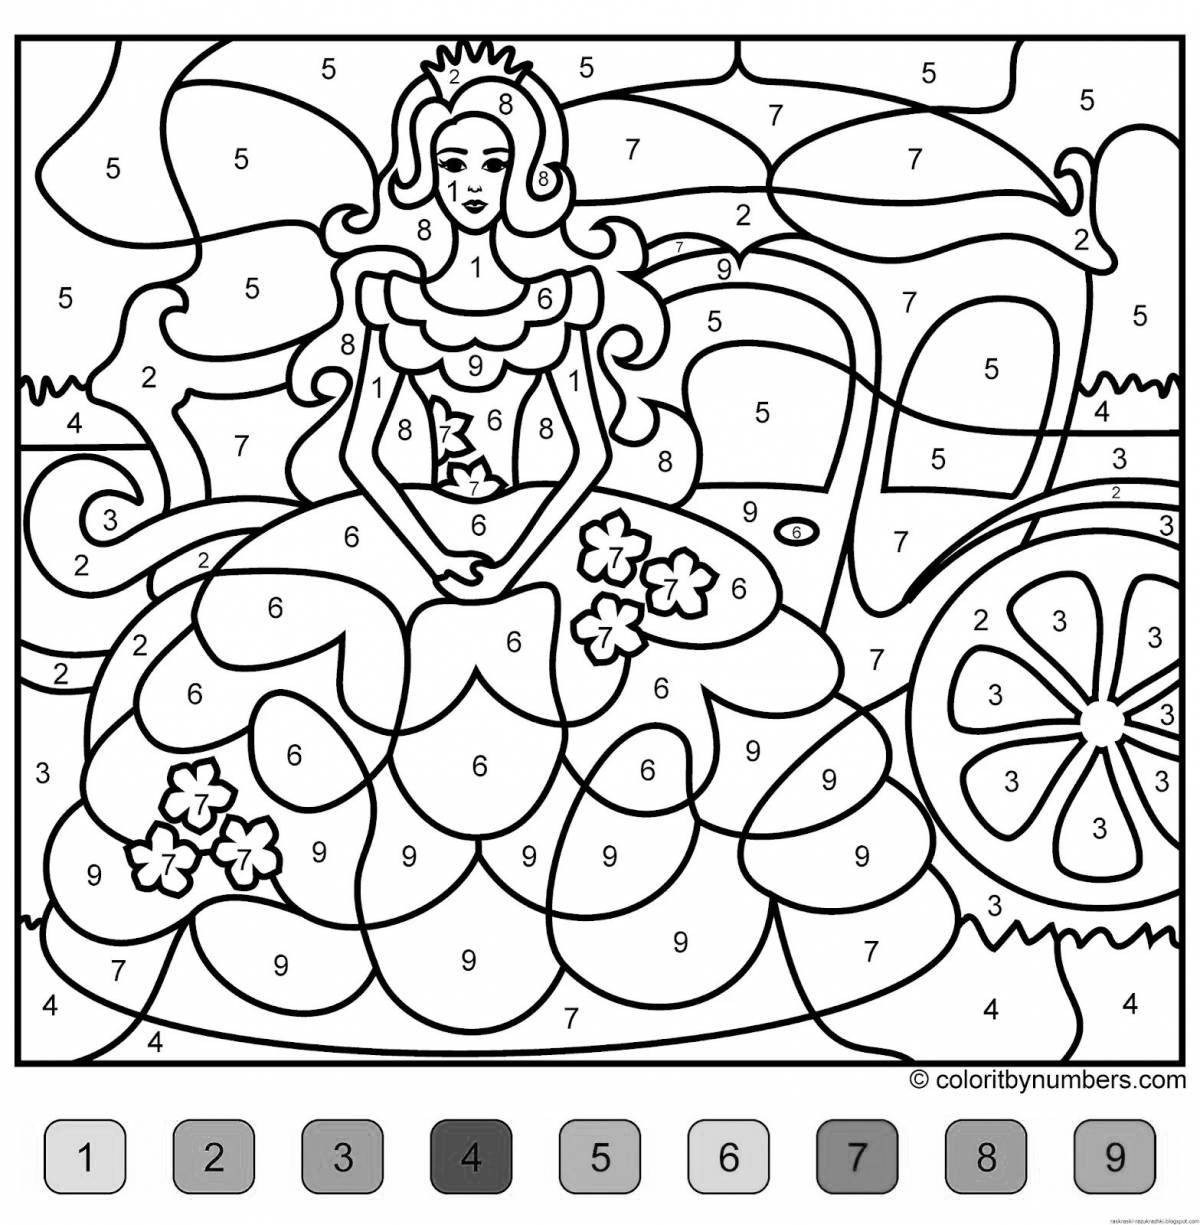 Coloring book for children aged 6 to 7